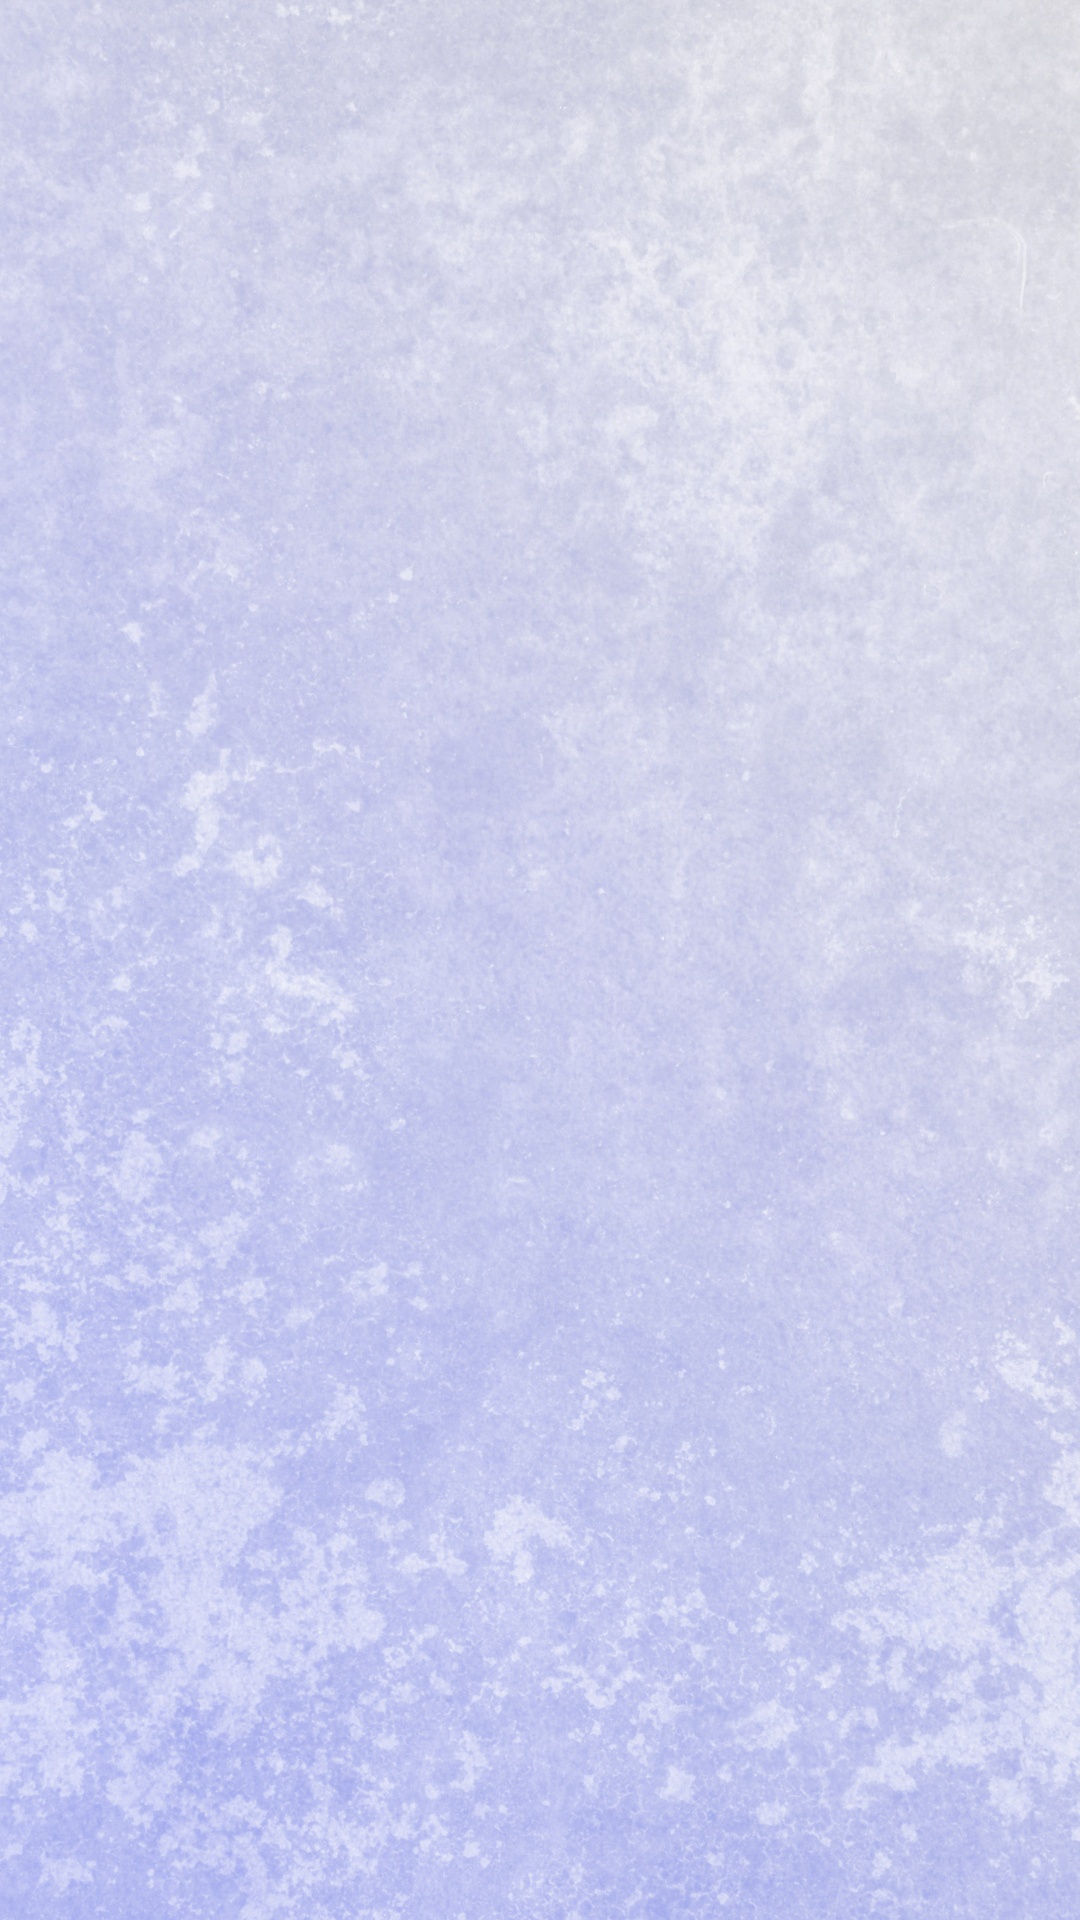 Blue Textile With White Paint. Wallpaper in 1080x1920 Resolution